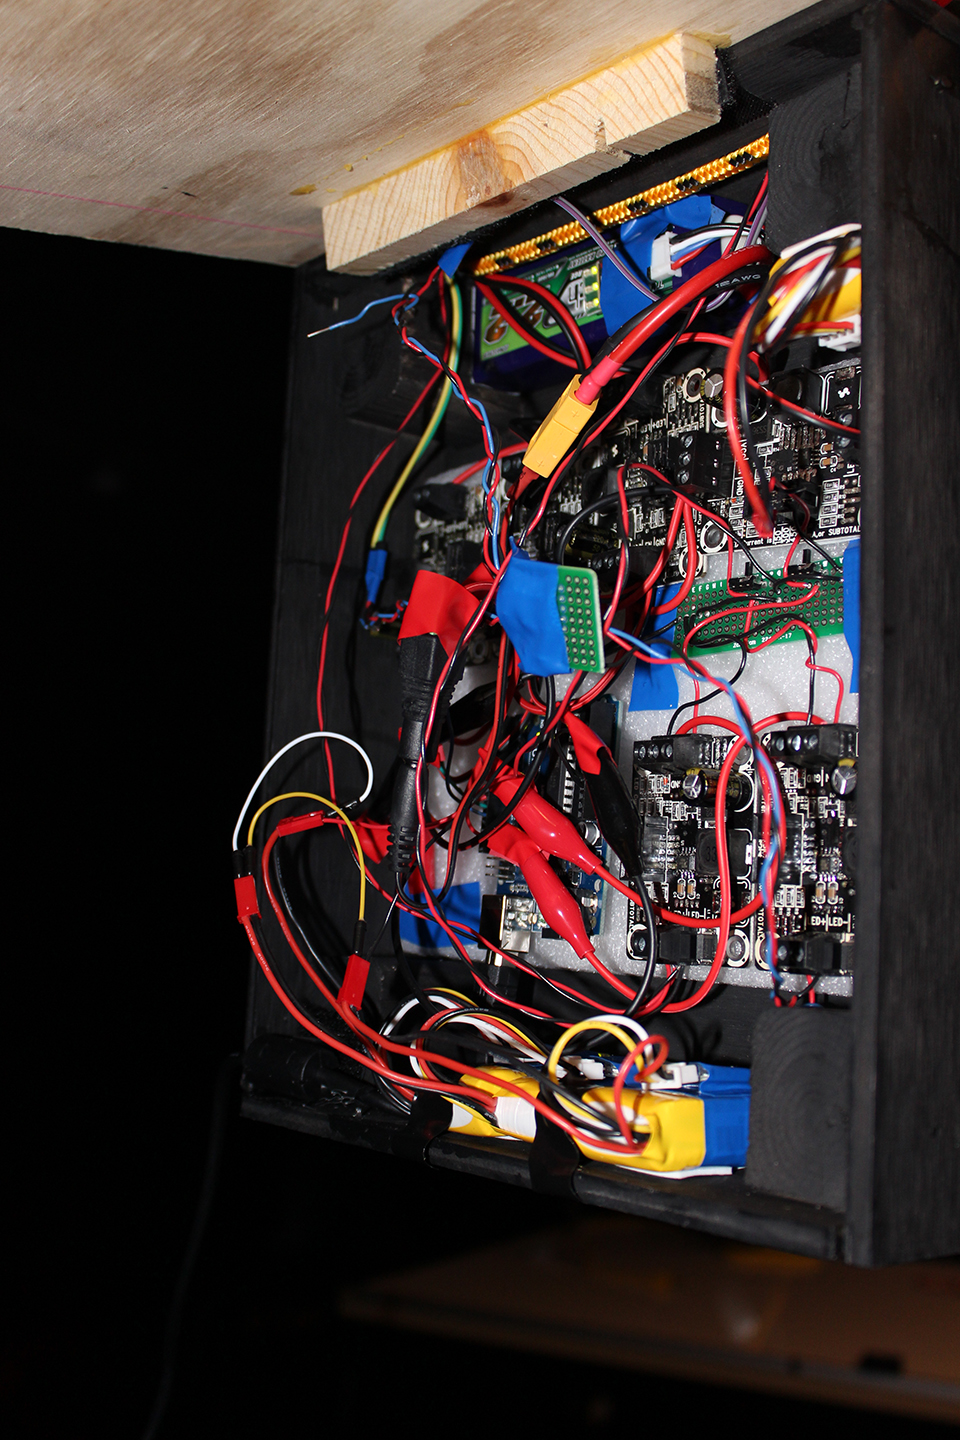 The electrical component box